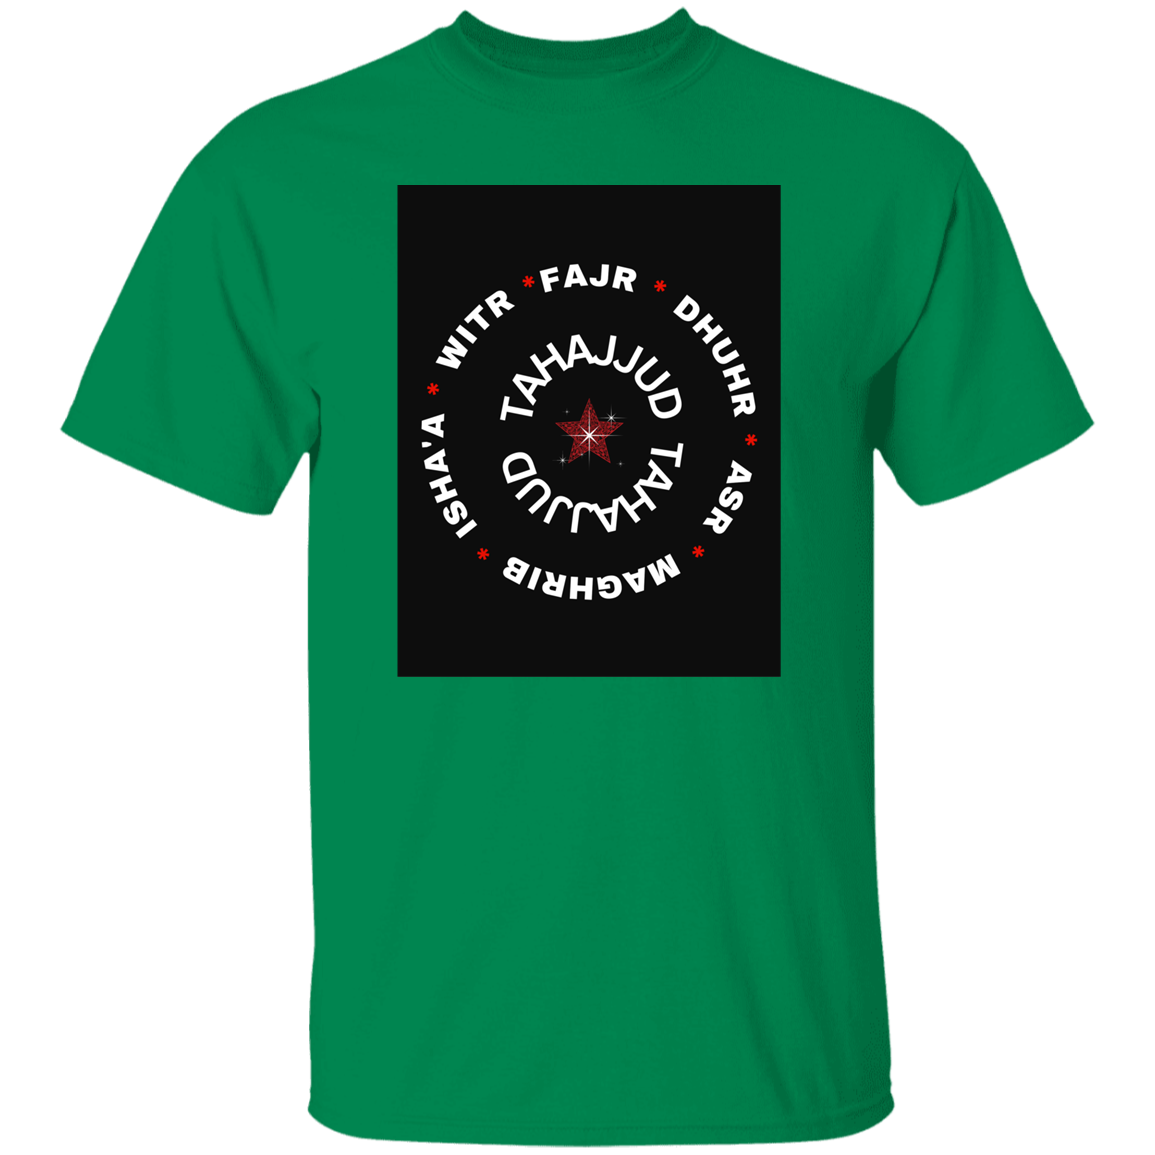 PRAYERS IN A CIRCLE LOGO  T-Shirt (MORE COLOR OPTIONS)